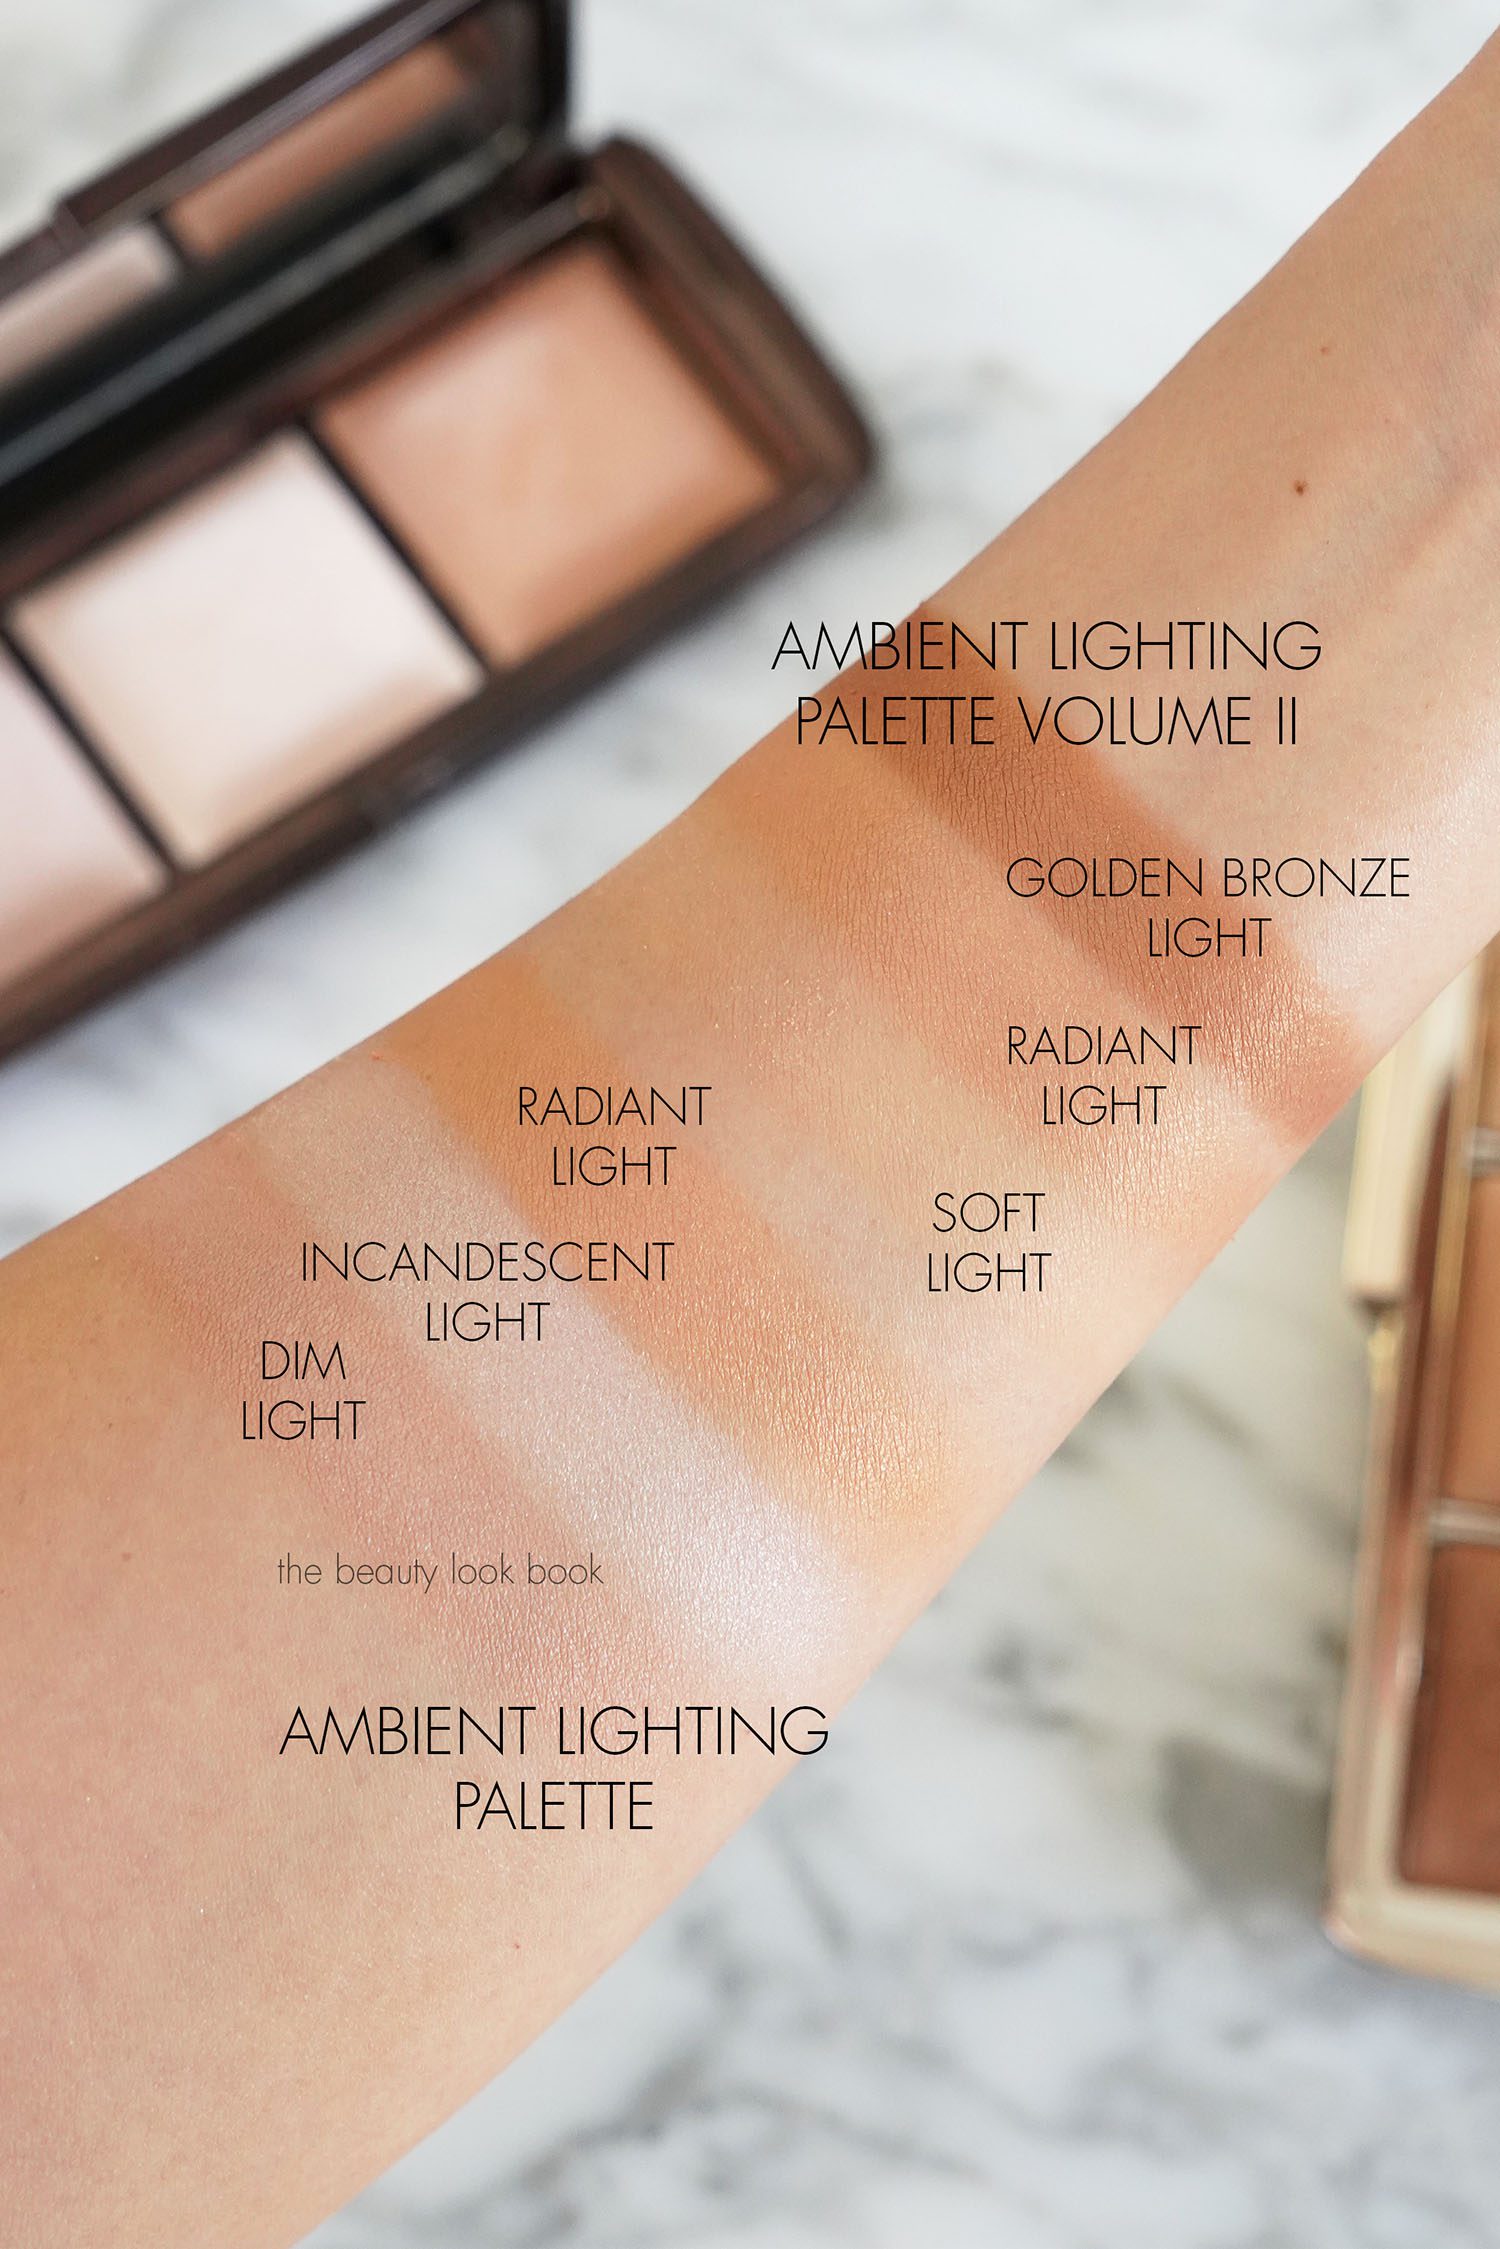 Makeup Favorites a Natural Flawless Glow - Beauty Look Book